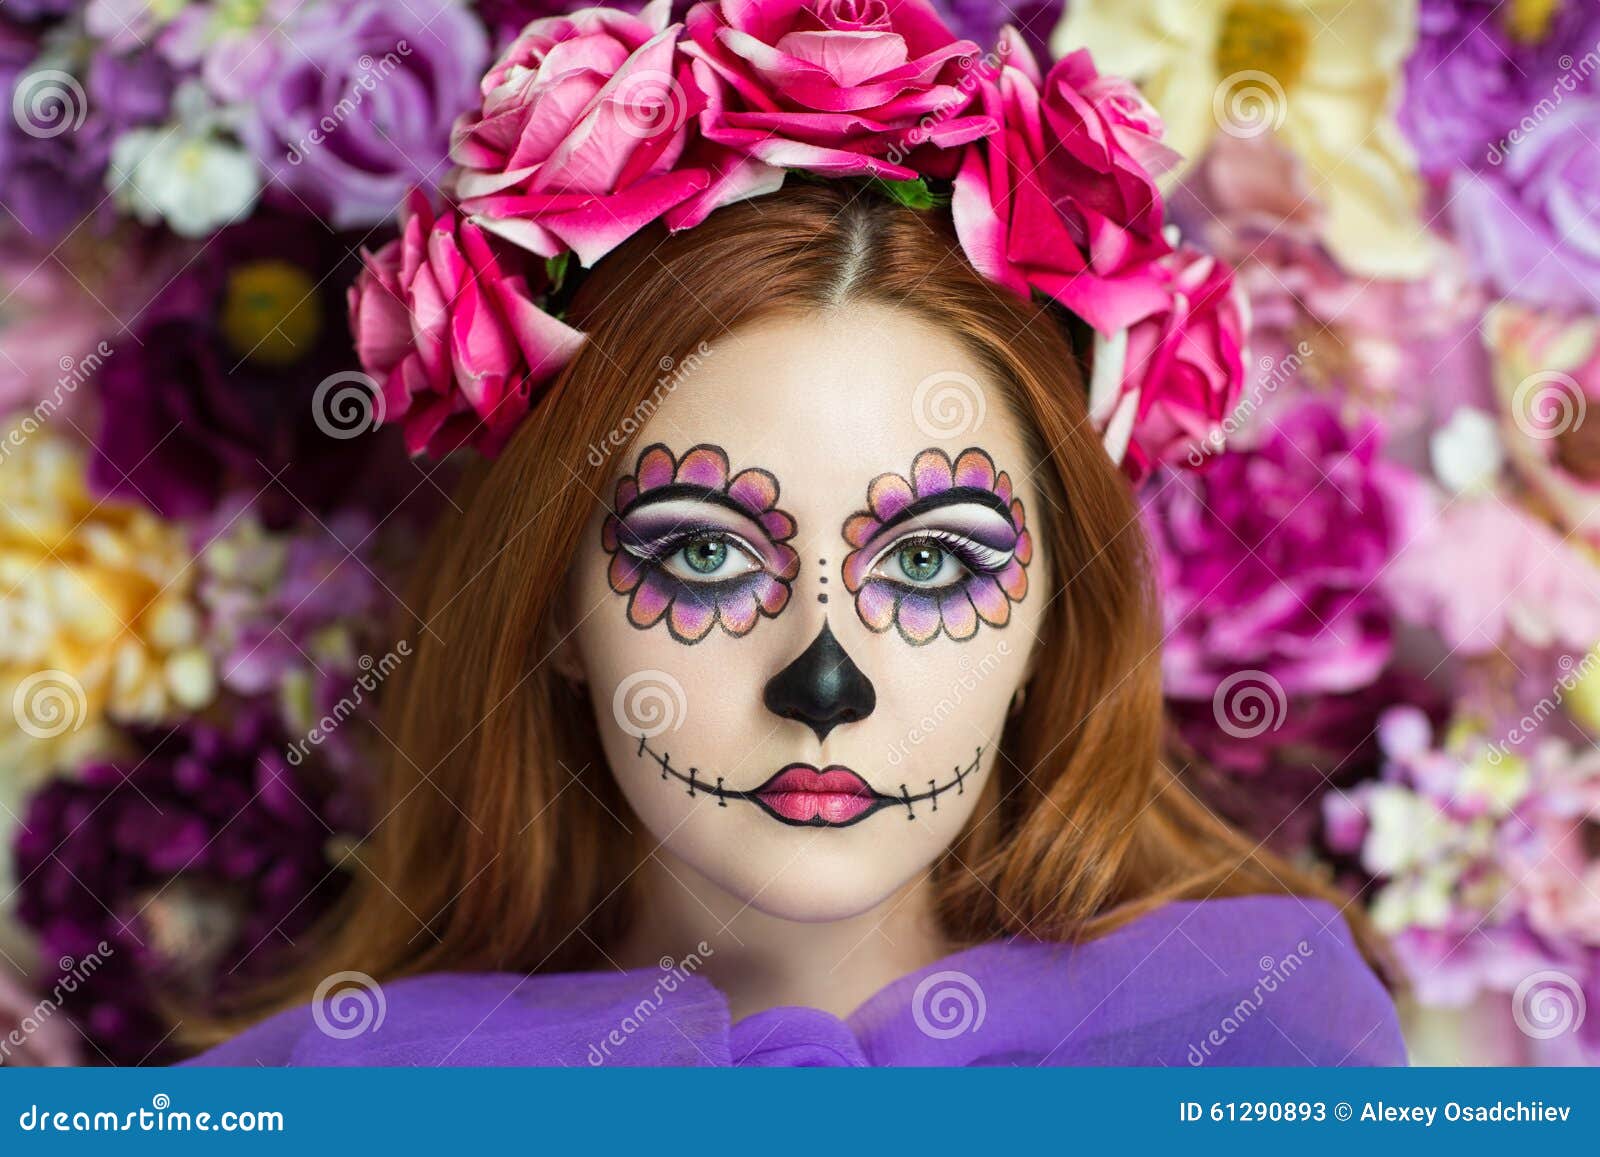 Day of the Dead stock image. Image of attractive, face - 61290893